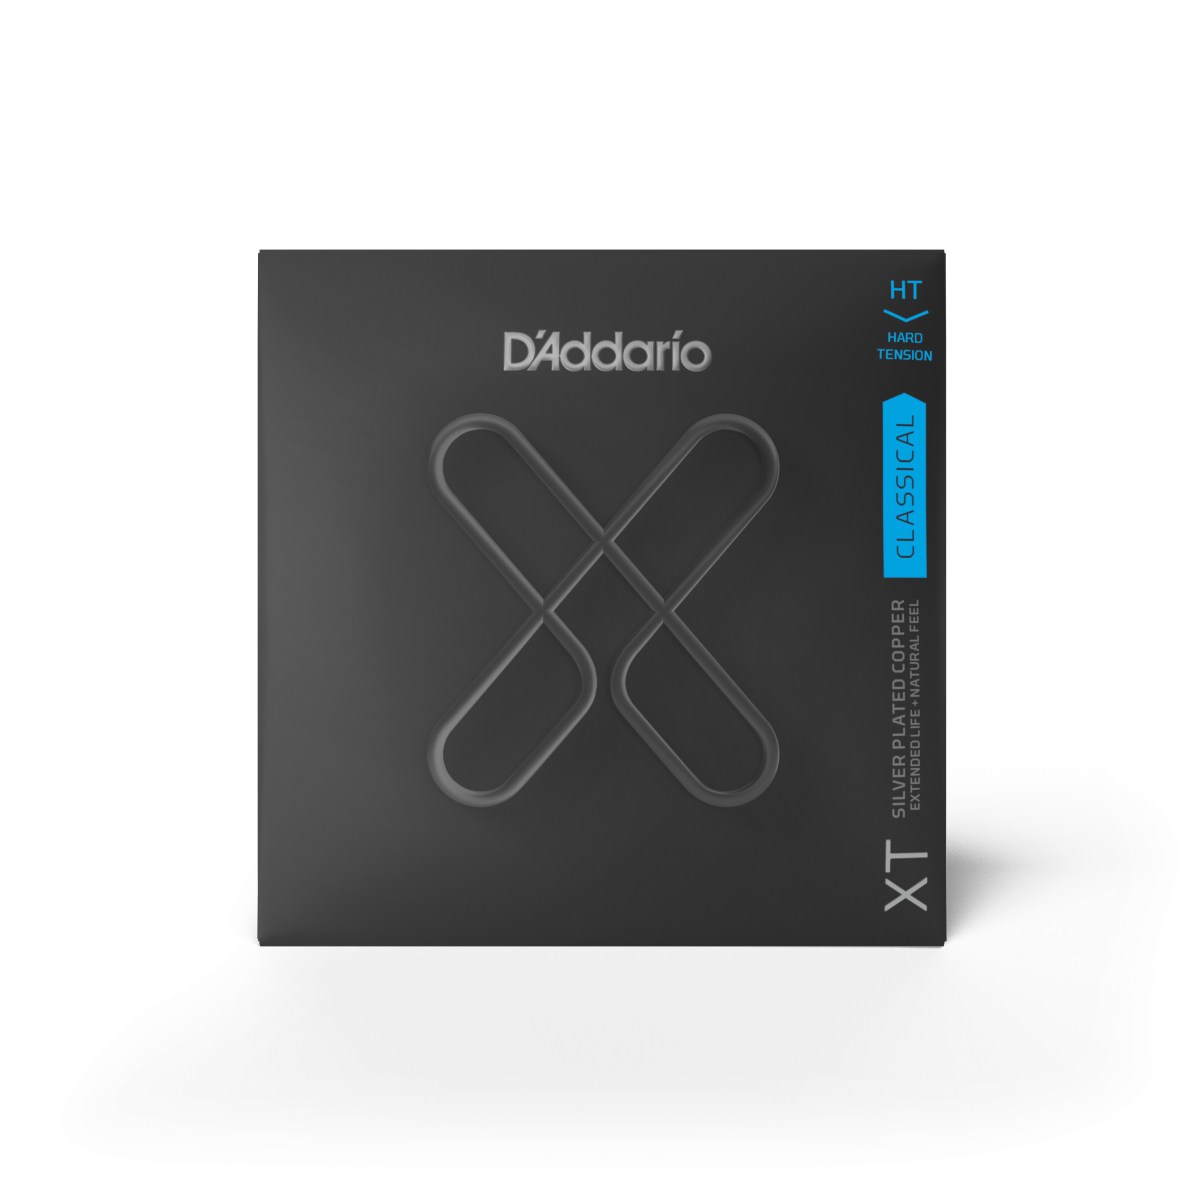 An image of D'Addario XT Classical Guitar Strings Hard Tension | PMT Online